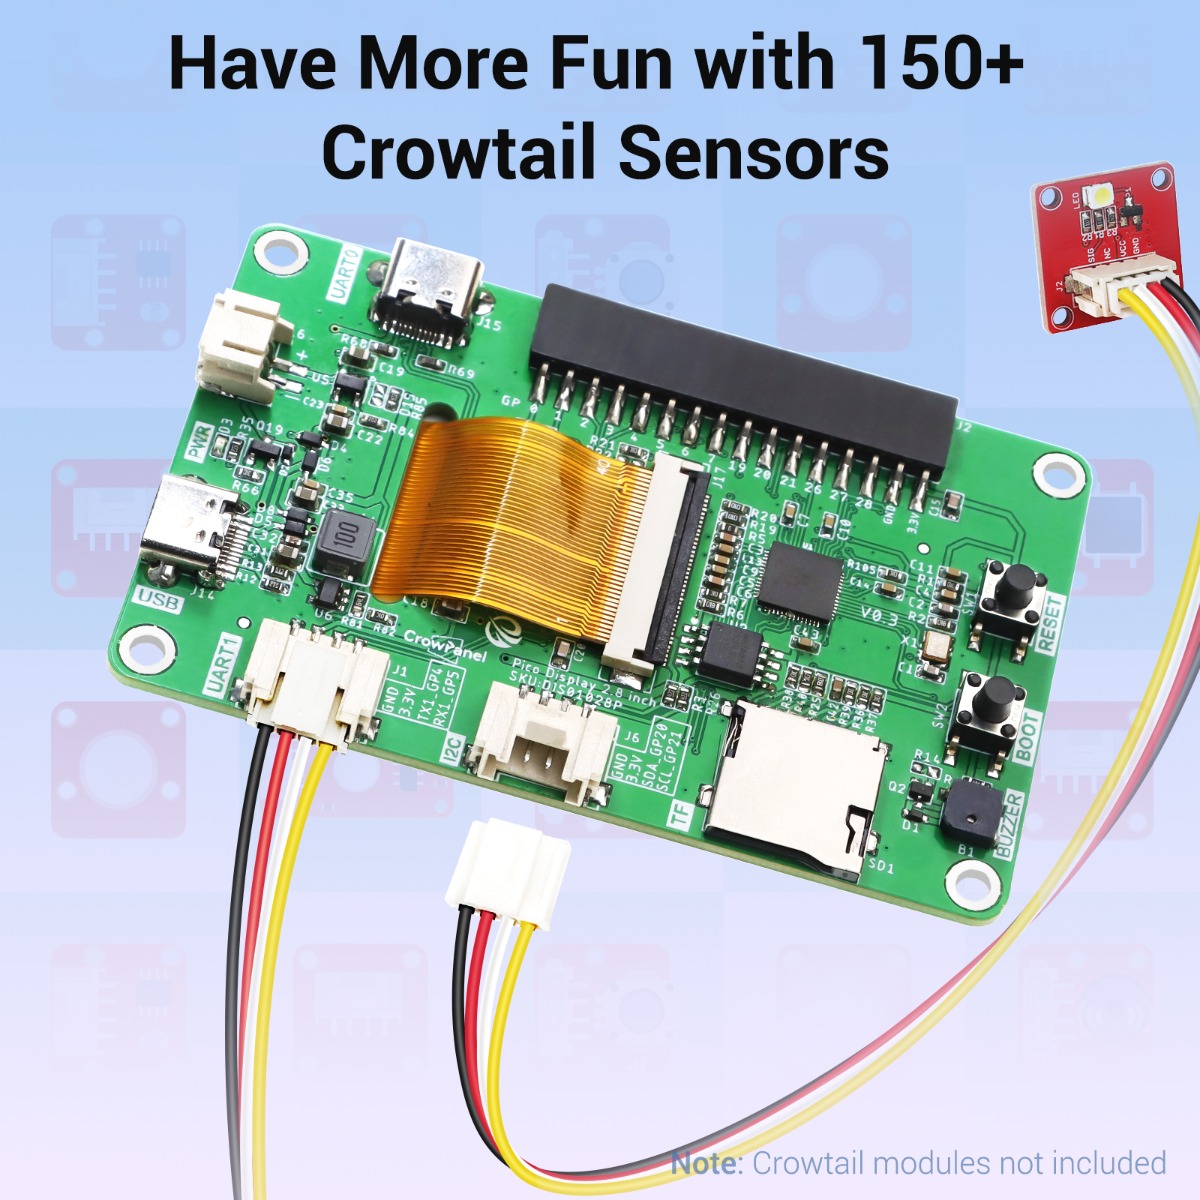 2.8 inch pico display connect with more than 150+ Crowtail sensors.